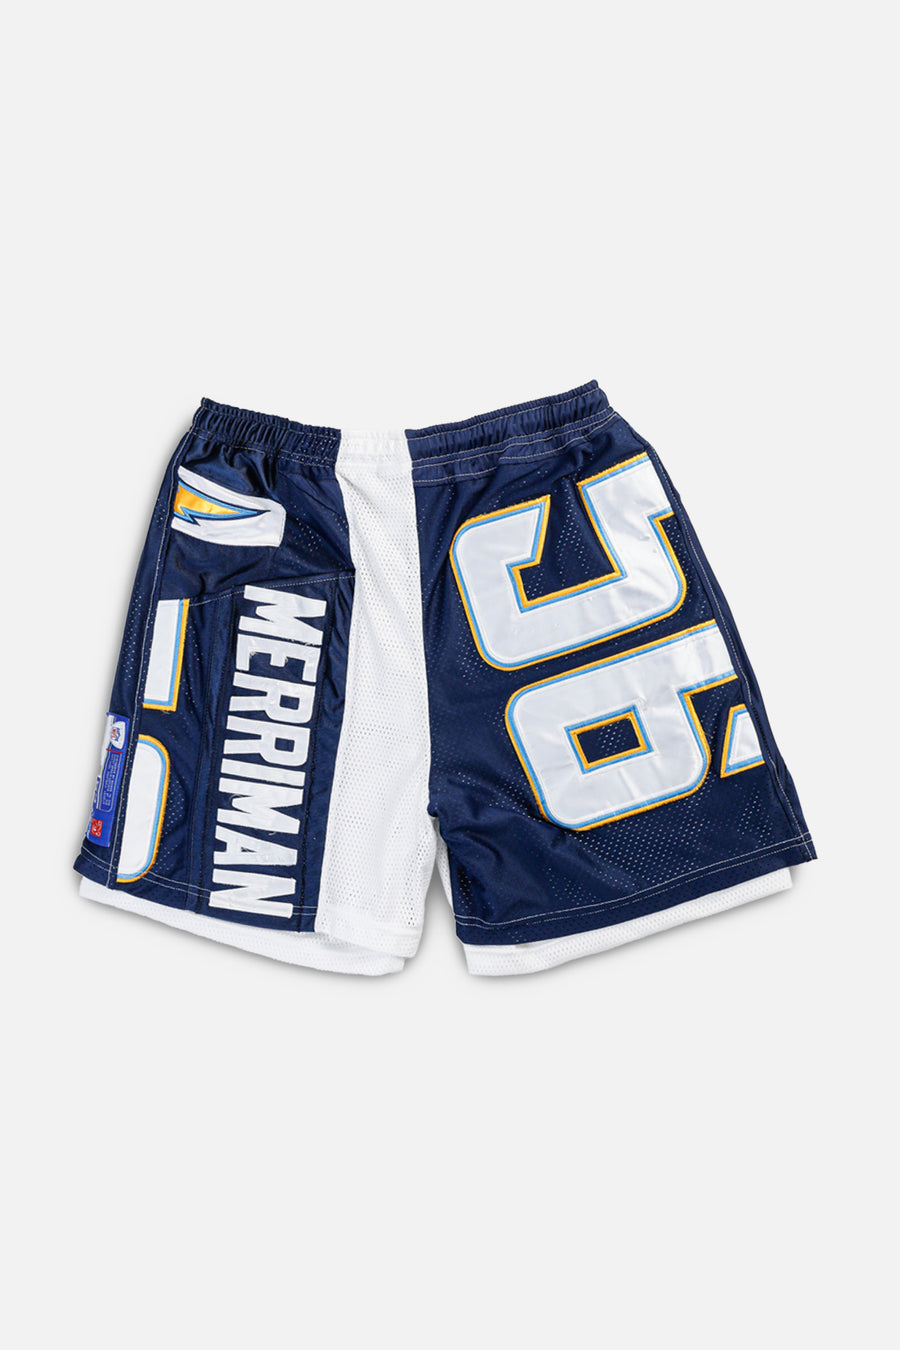 Unisex Rework Los Angeles Chargers NFL Jersey Shorts - XL